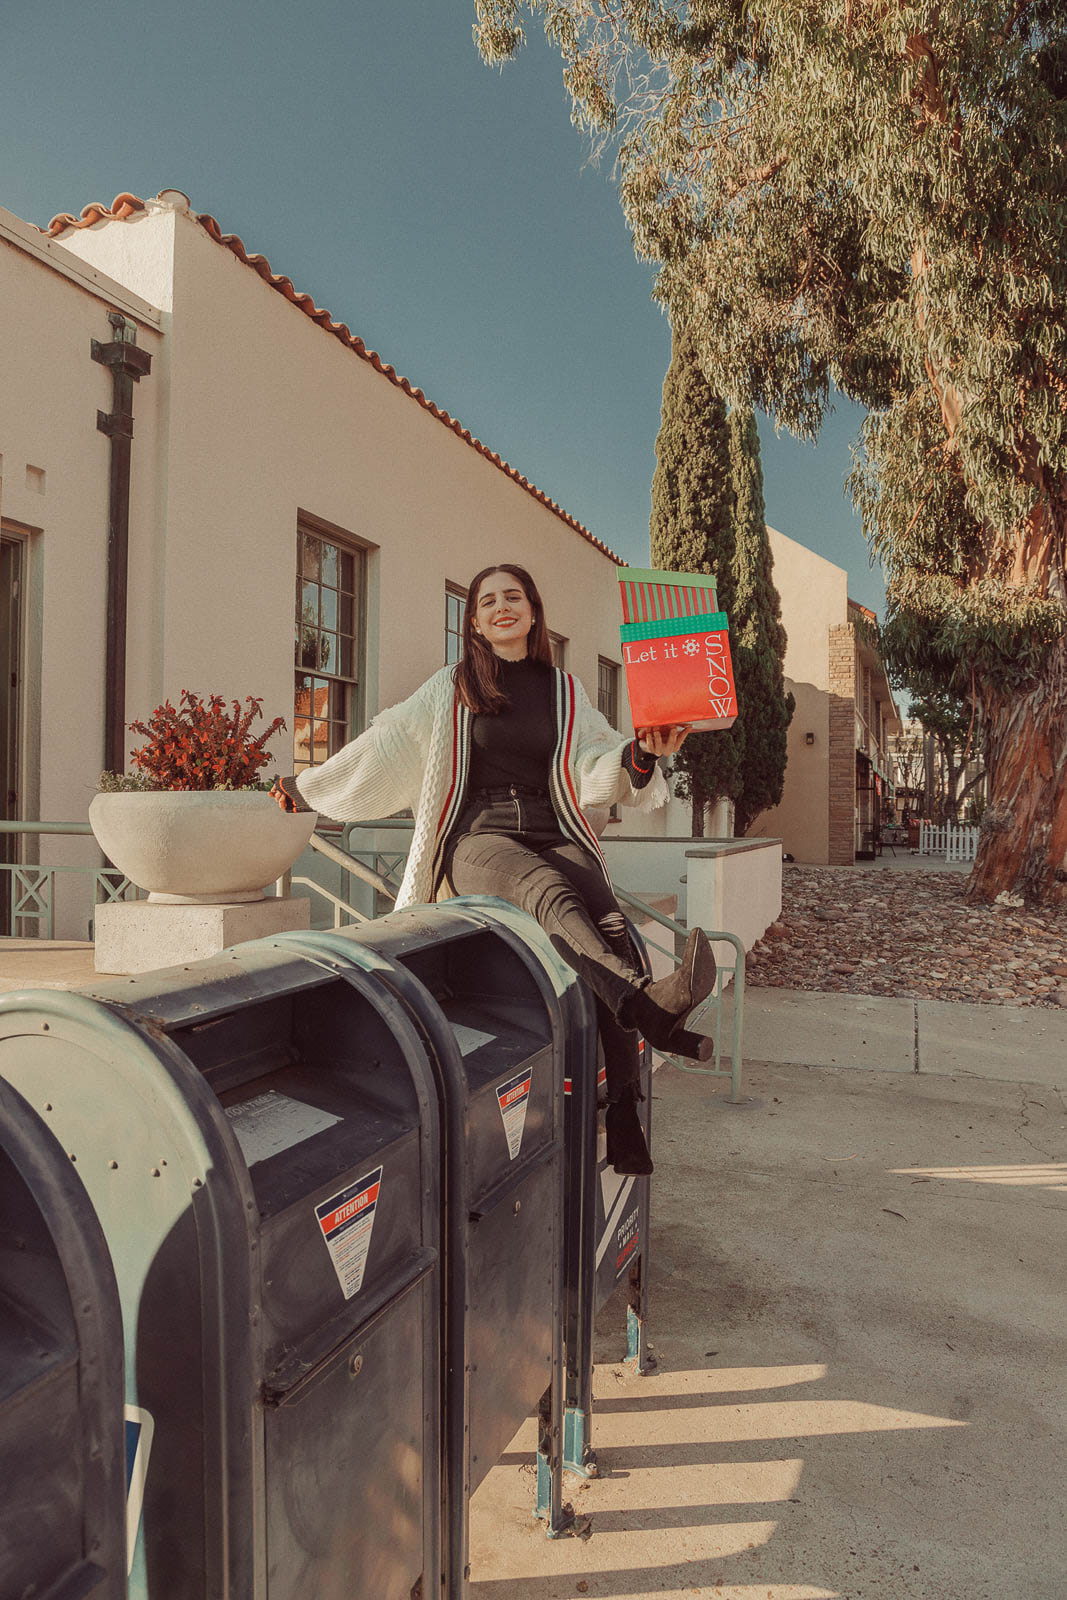 Woman wearing white sweater holding Christmas gifts sitting on mailbox - 5 Creative Christmas Photoshoot Ideas to Try This Season